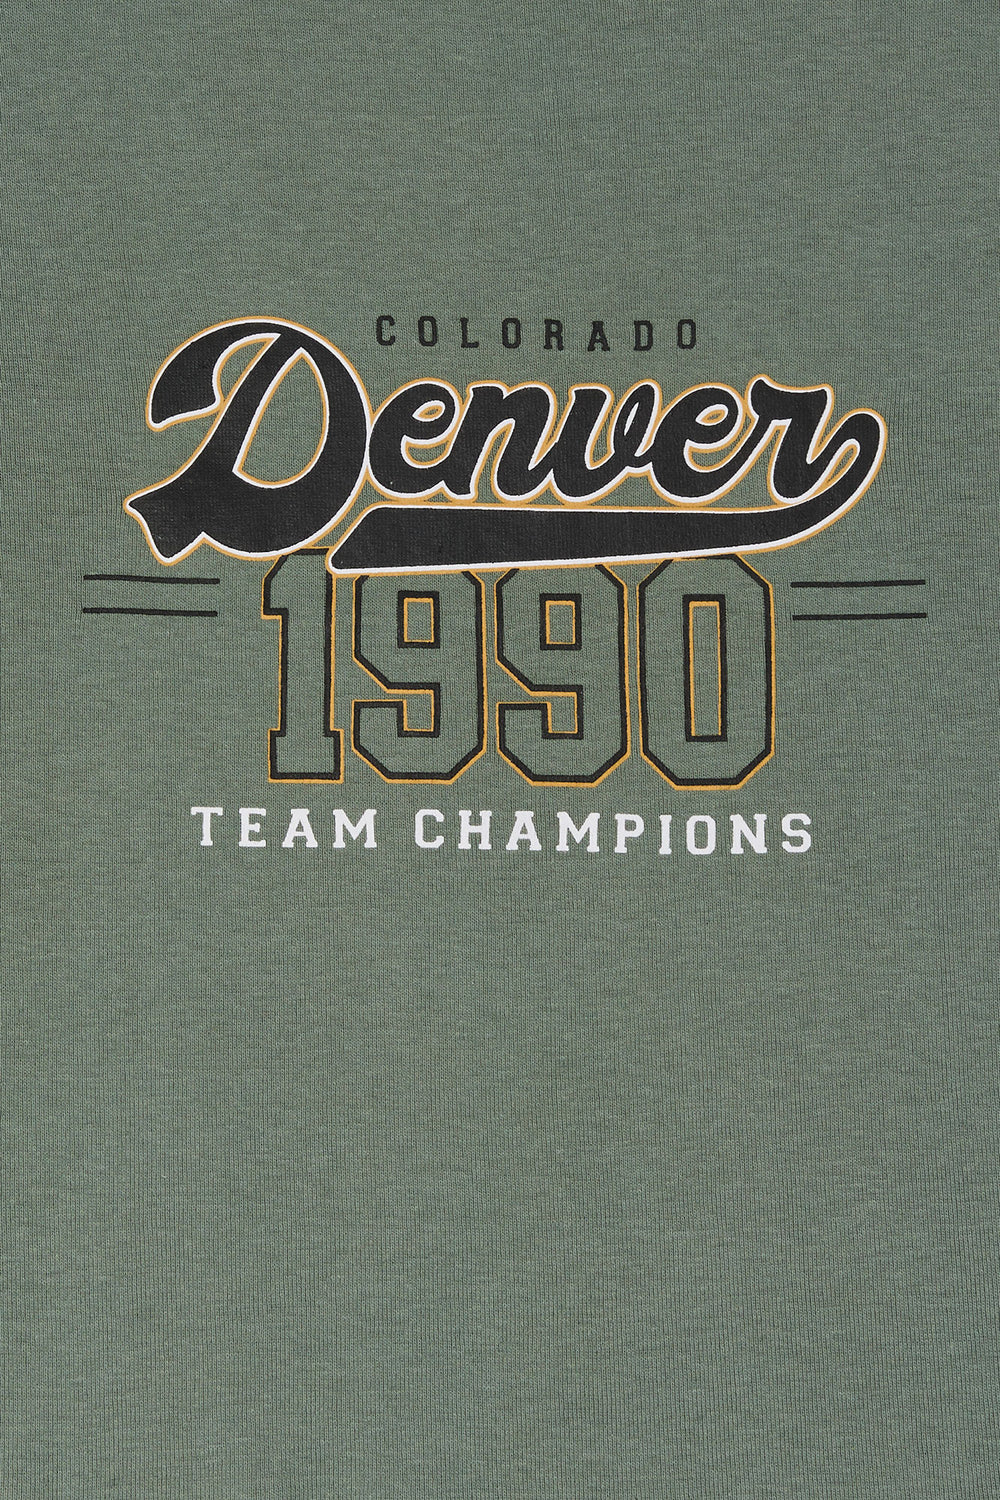 Denver 1990 Graphic Baby T-Shirt Denver 1990 Graphic Baby T-Shirt 1